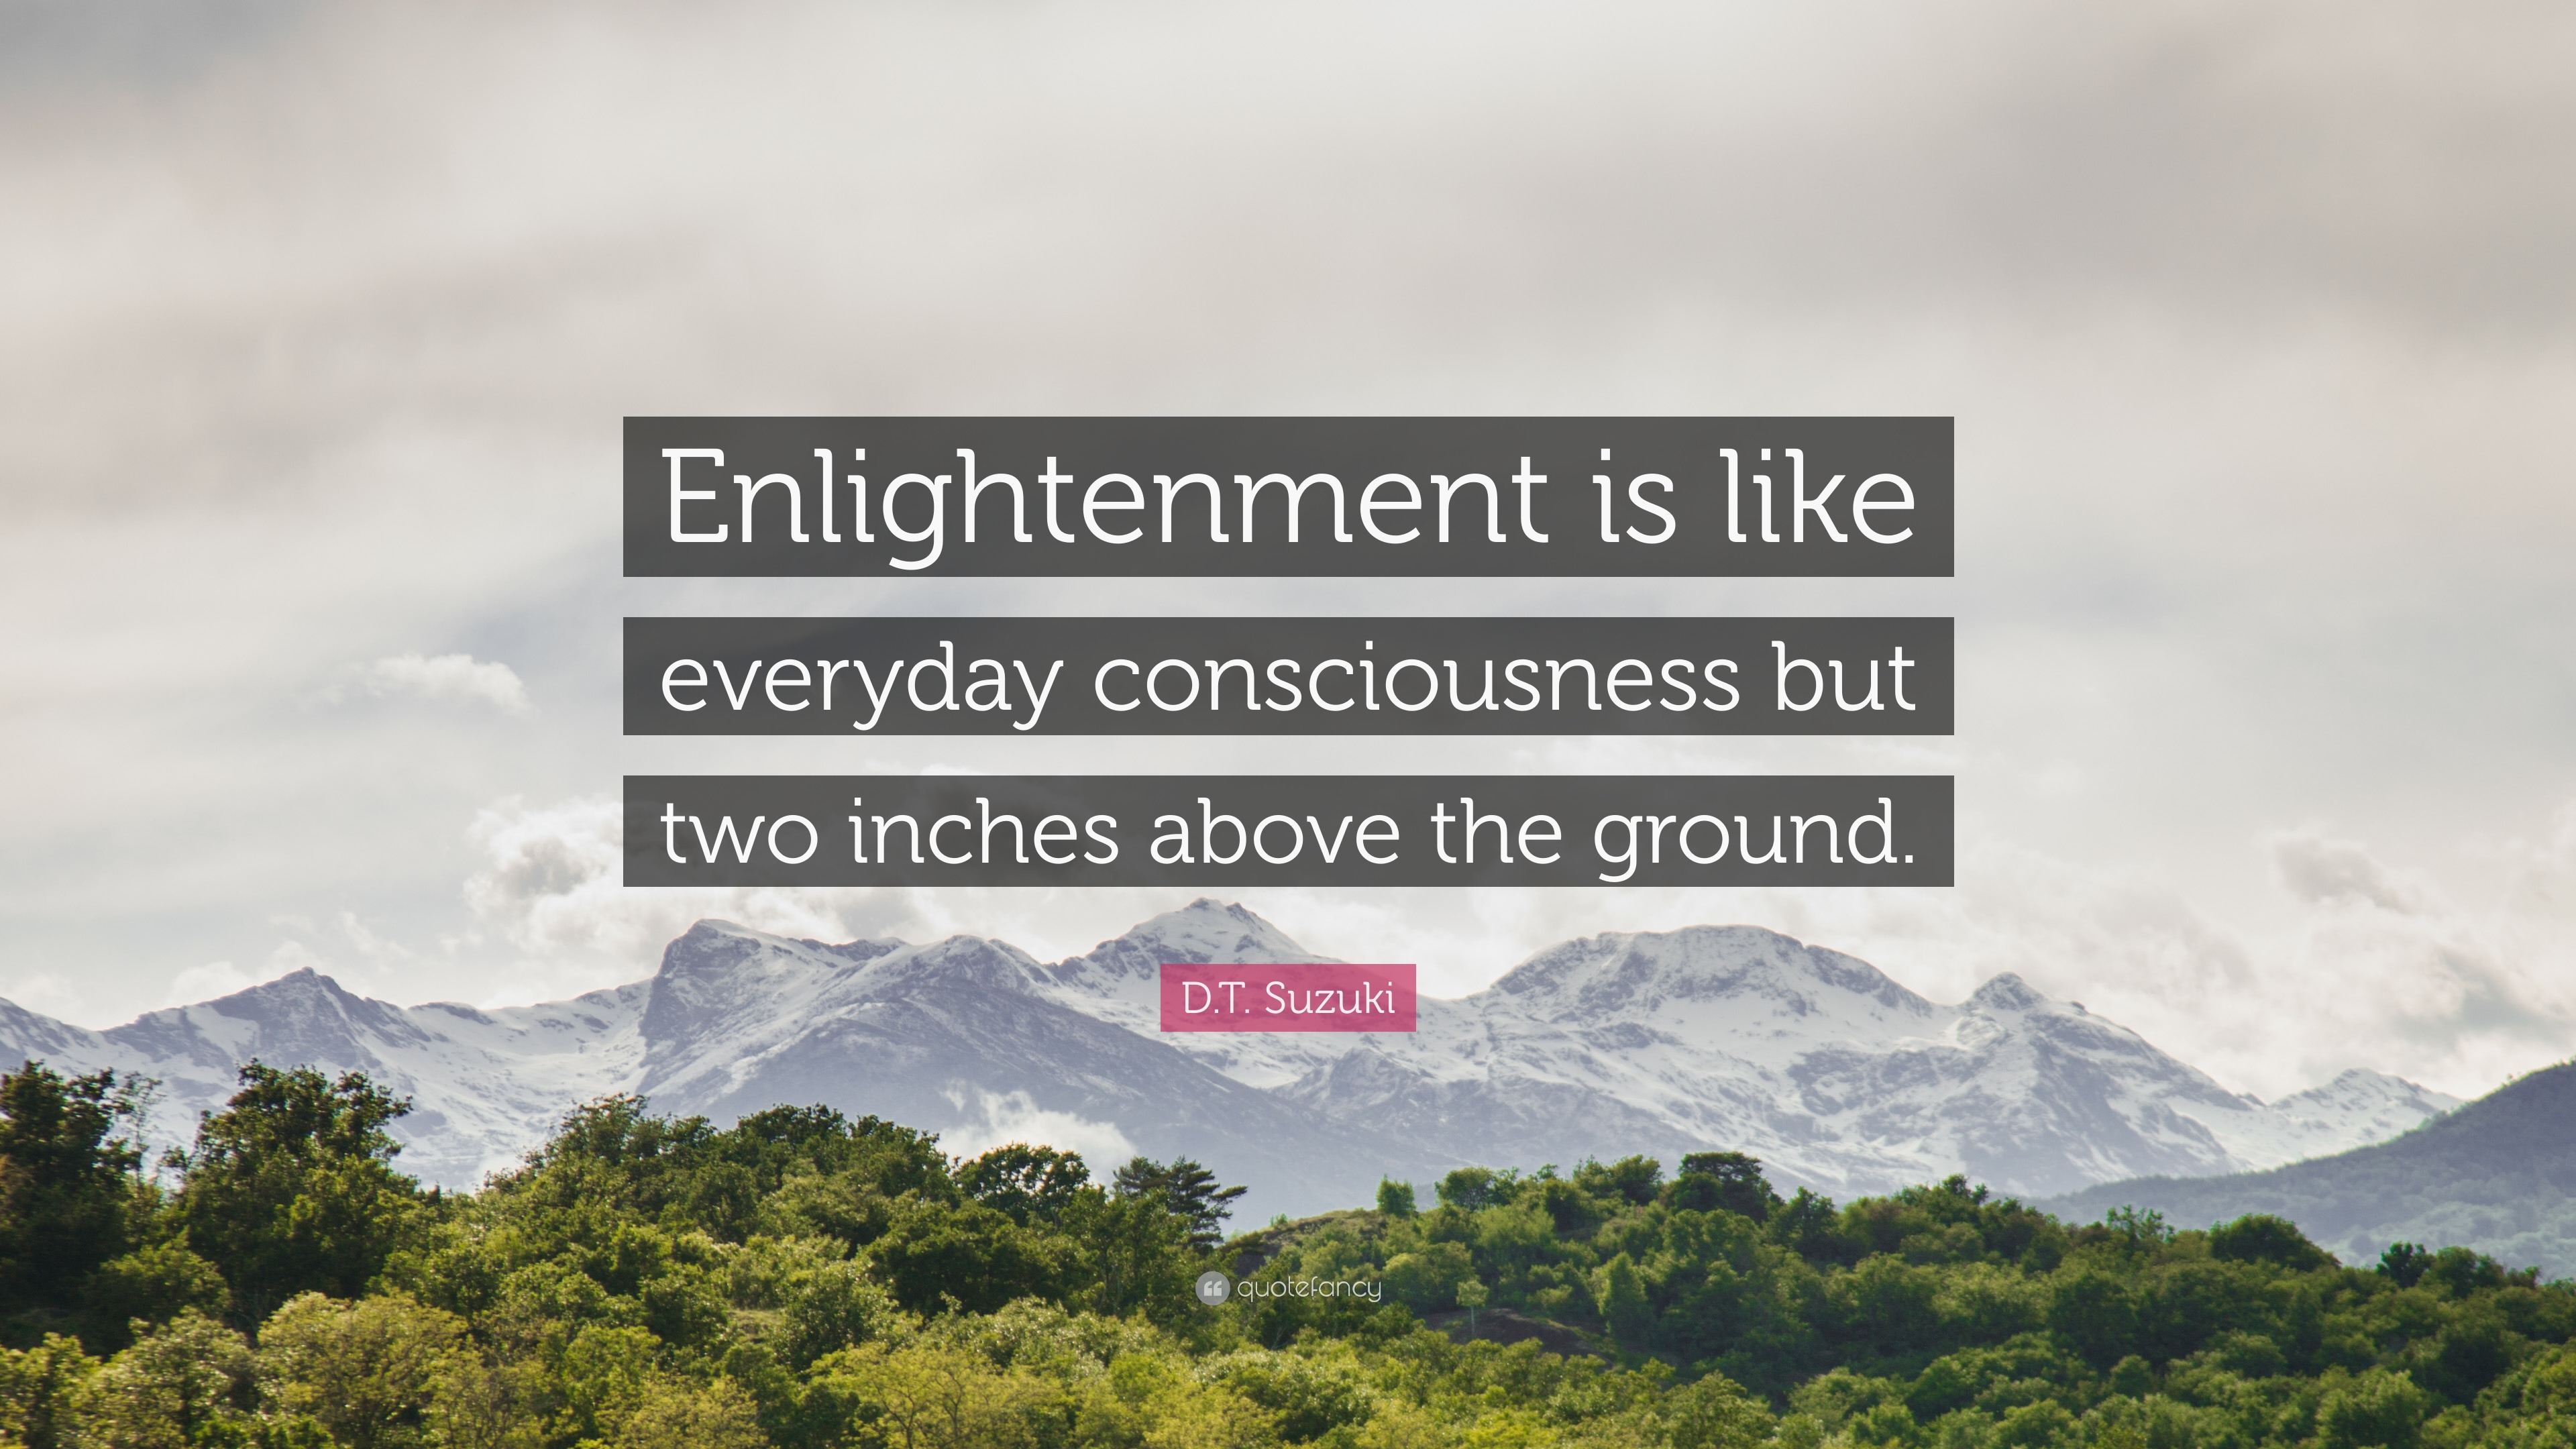 D.T. Suzuki Quote: “Enlightenment is like everyday consciousness